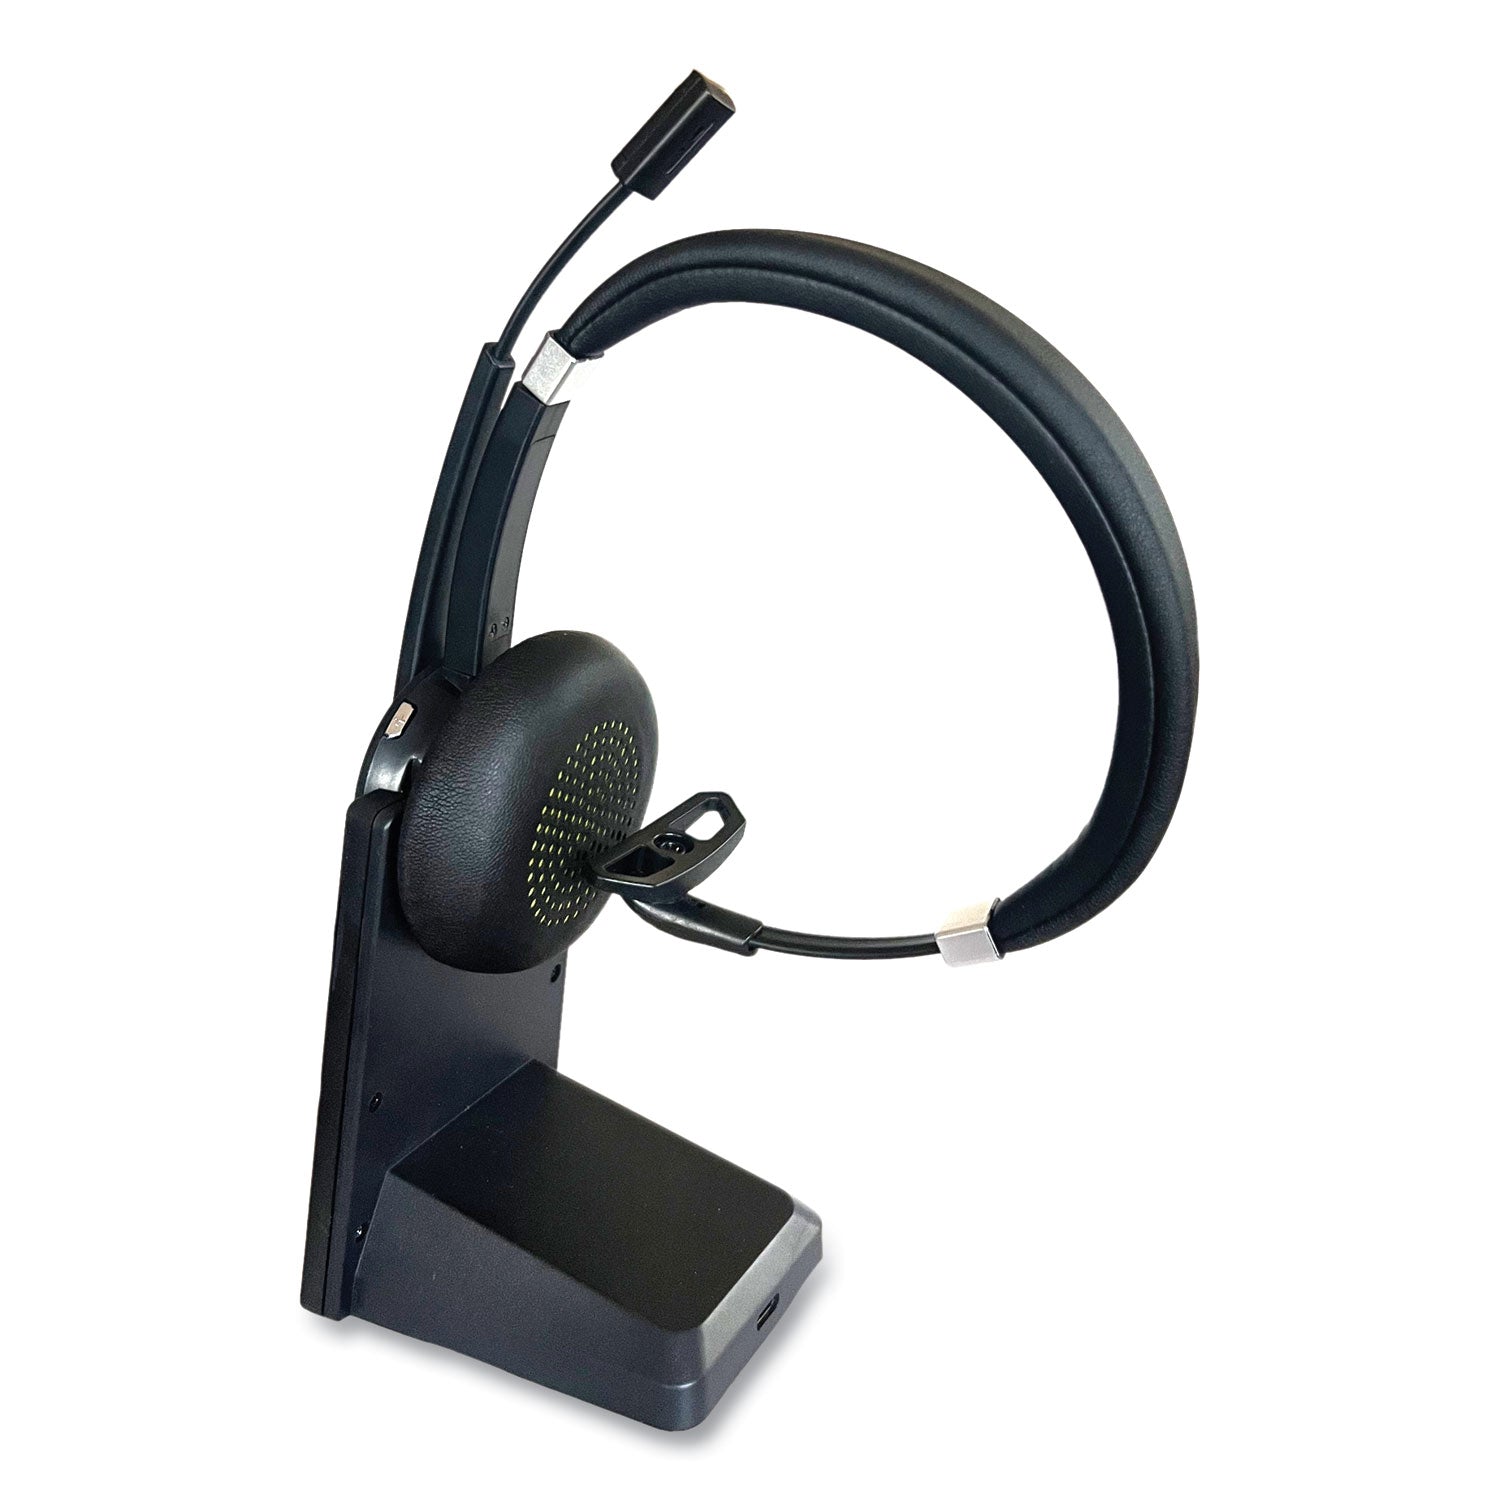 ivr70002-monaural-over-the-head-bluetooth-headset-black-silver_ivr70002 - 3